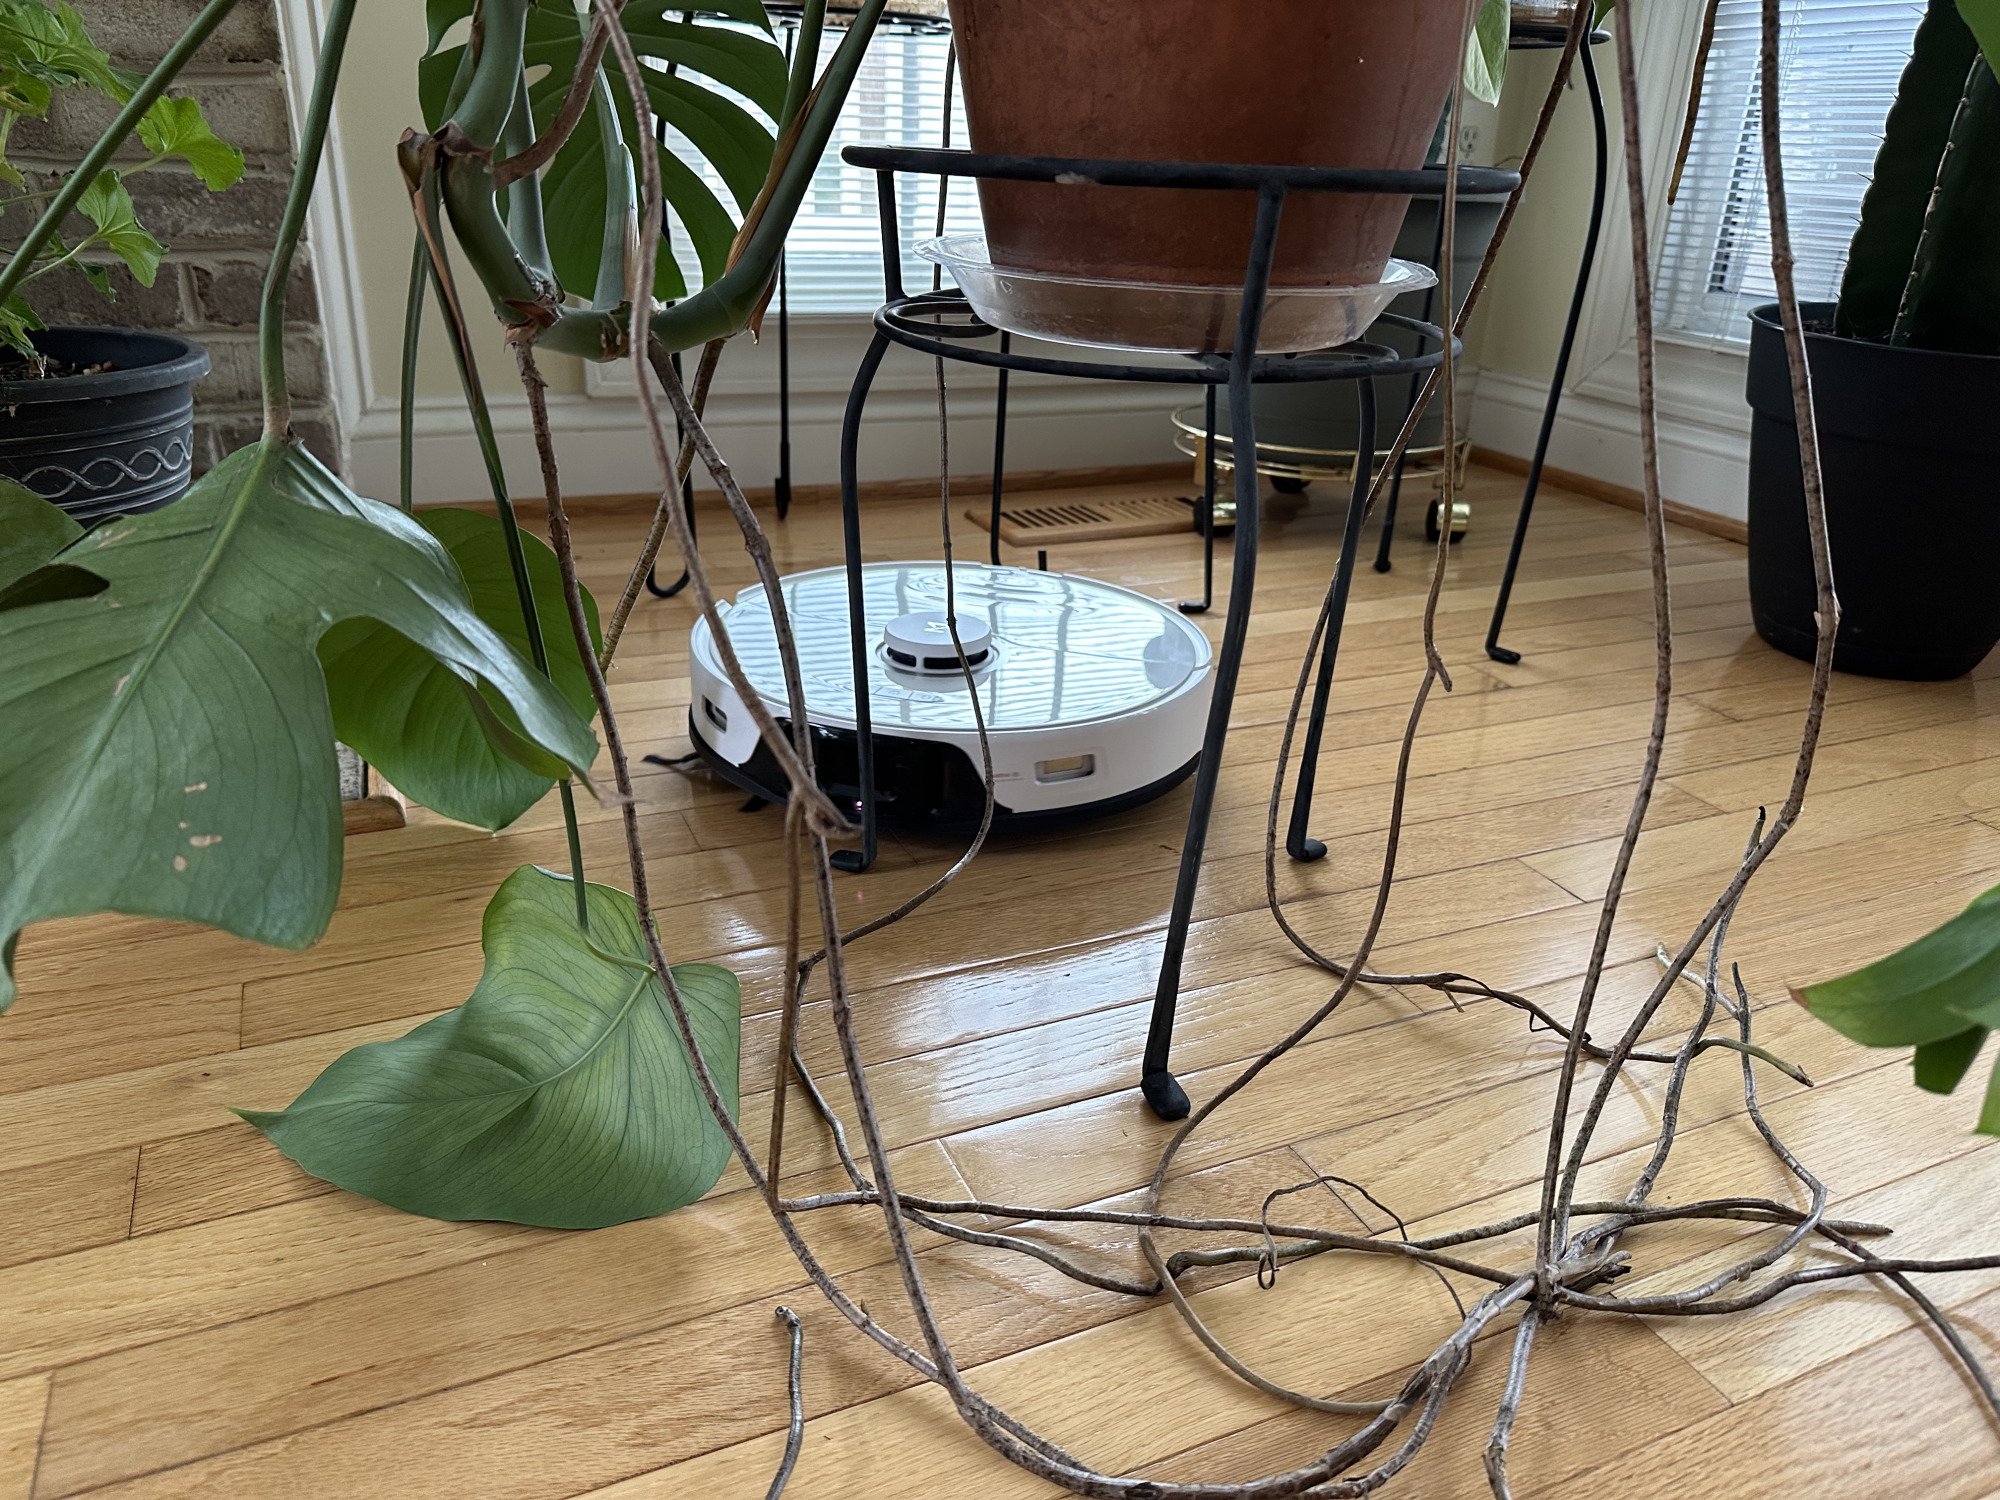 The Roborock S8 Pro Ultra "hiding" among planters and plants in a living room setting